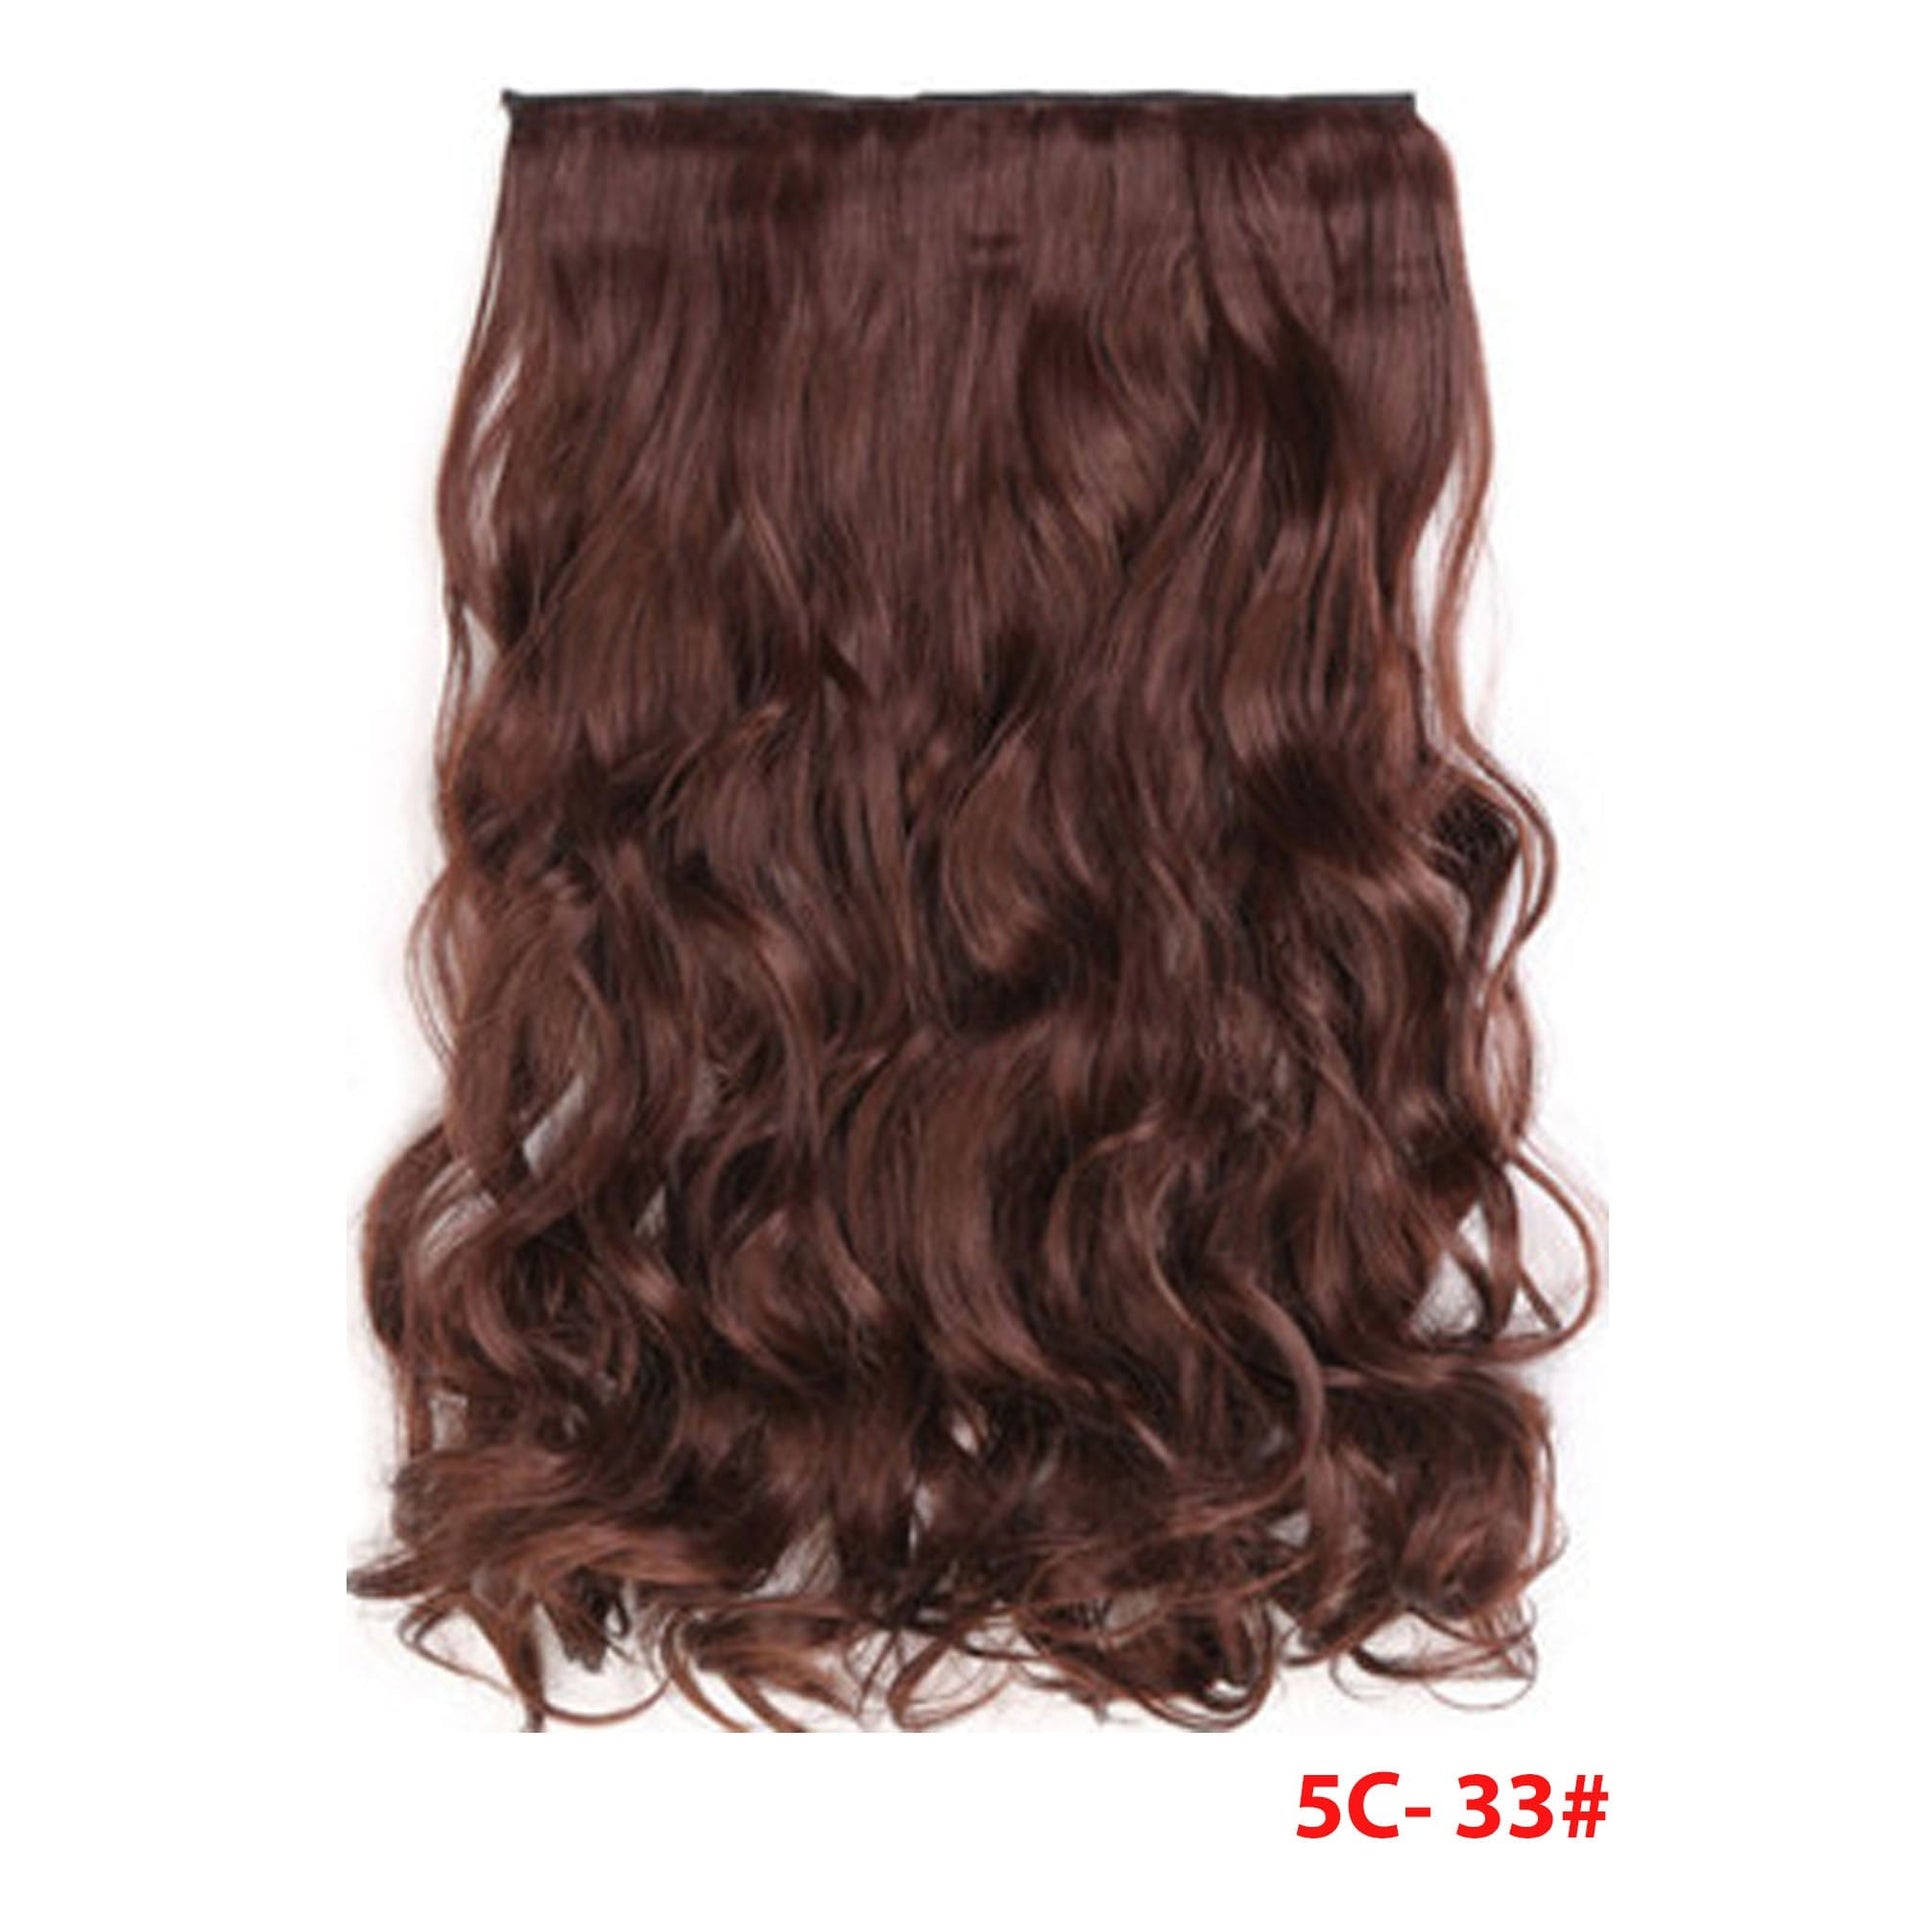 nevermindyrhead Women Clip In 3/4 Full Head Long Curly Synthetic Hair Extensions 5 Clips 24